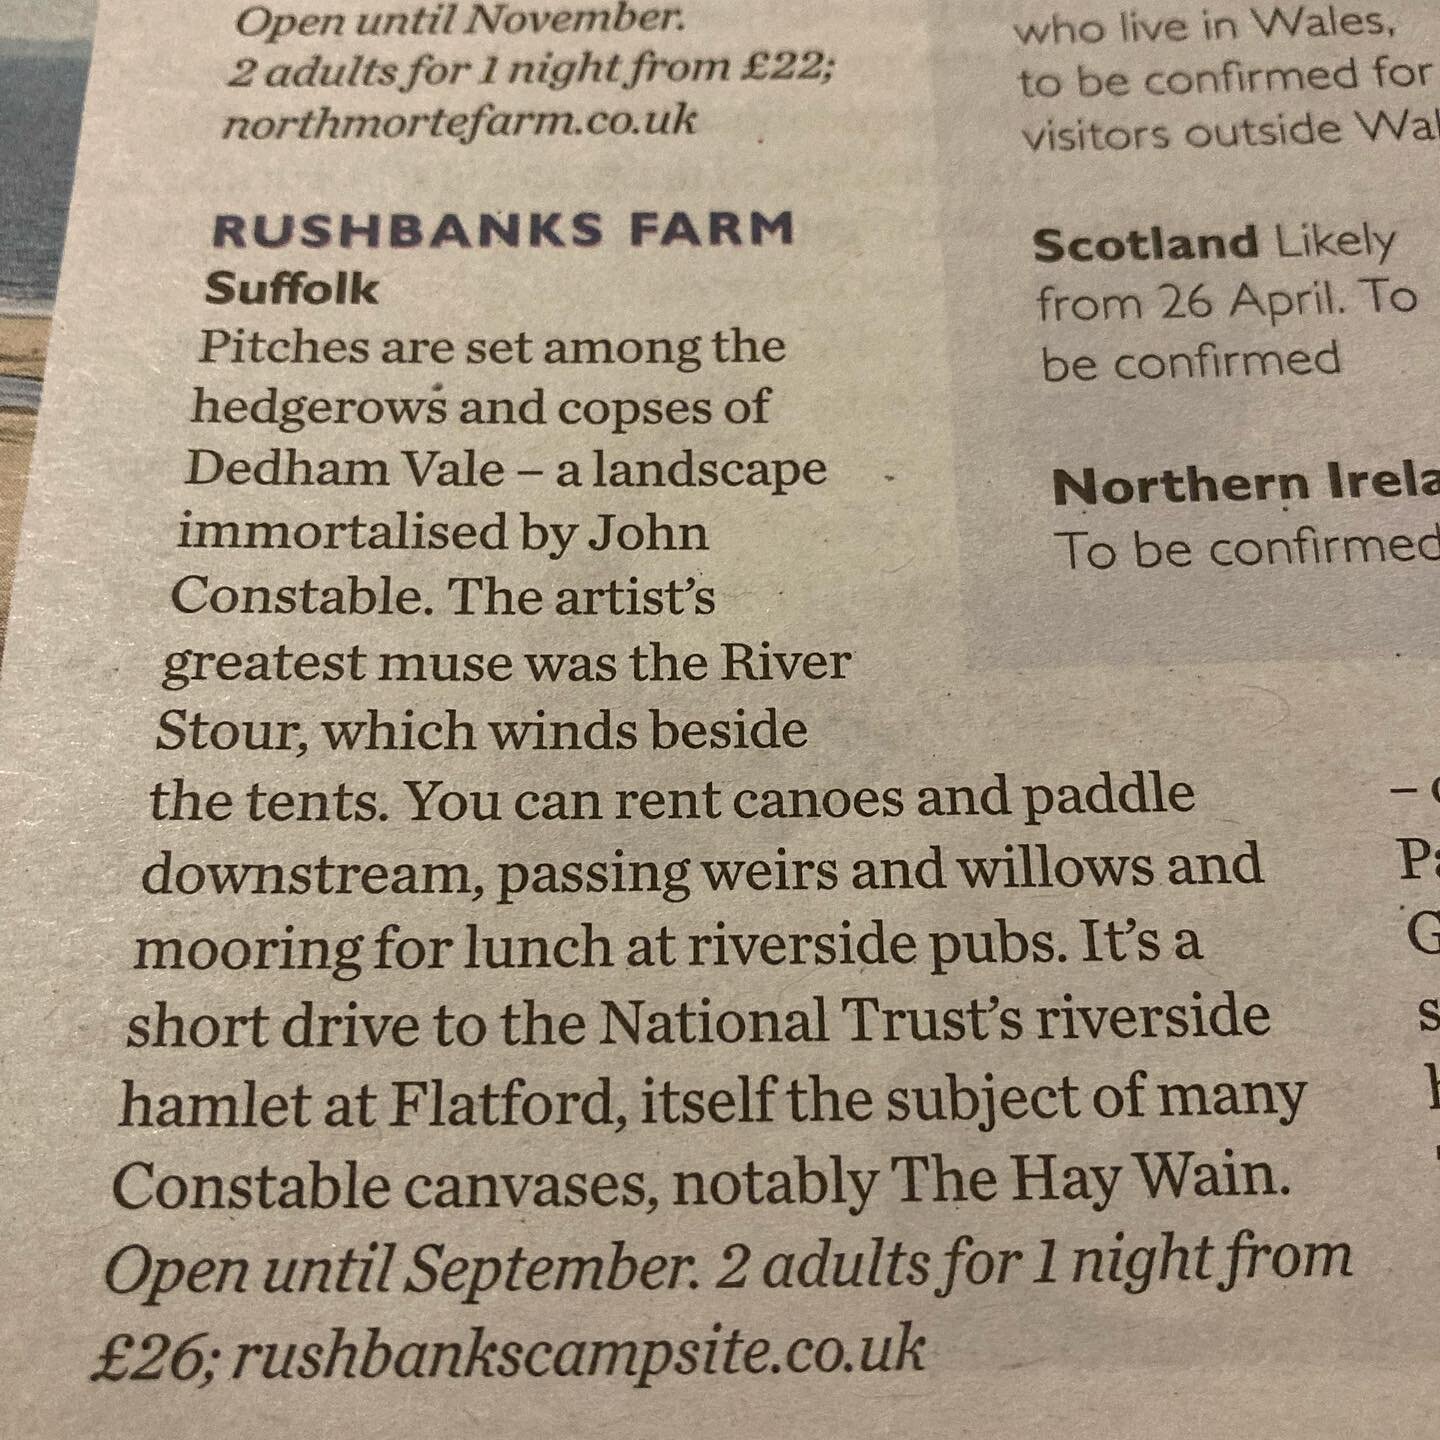 A huge THANK YOU to Waitrose for writing a small article on our Campsite in their Weekend Magazine. It&rsquo;s Essential reading for sure. #rushbankscampsite #waitrose #canoerental #counstablecountry #suffolkcamping